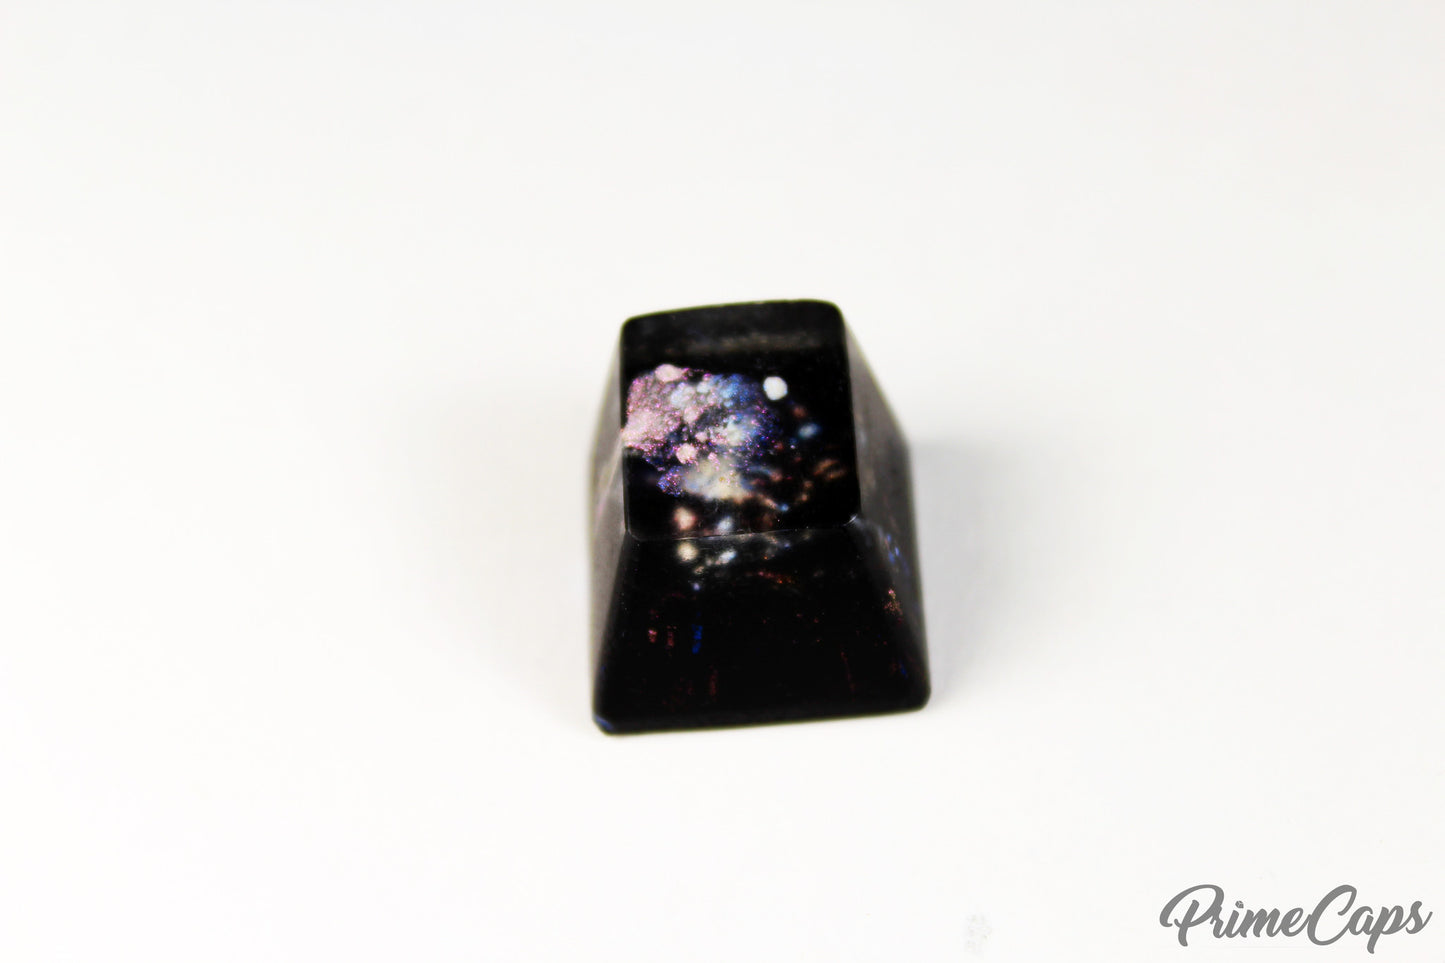 Chaos Caps 1.1 - Deep Field - PrimeCaps Keycap - Blank and Sculpted Artisan Keycaps for cherry MX mechanical keyboards 